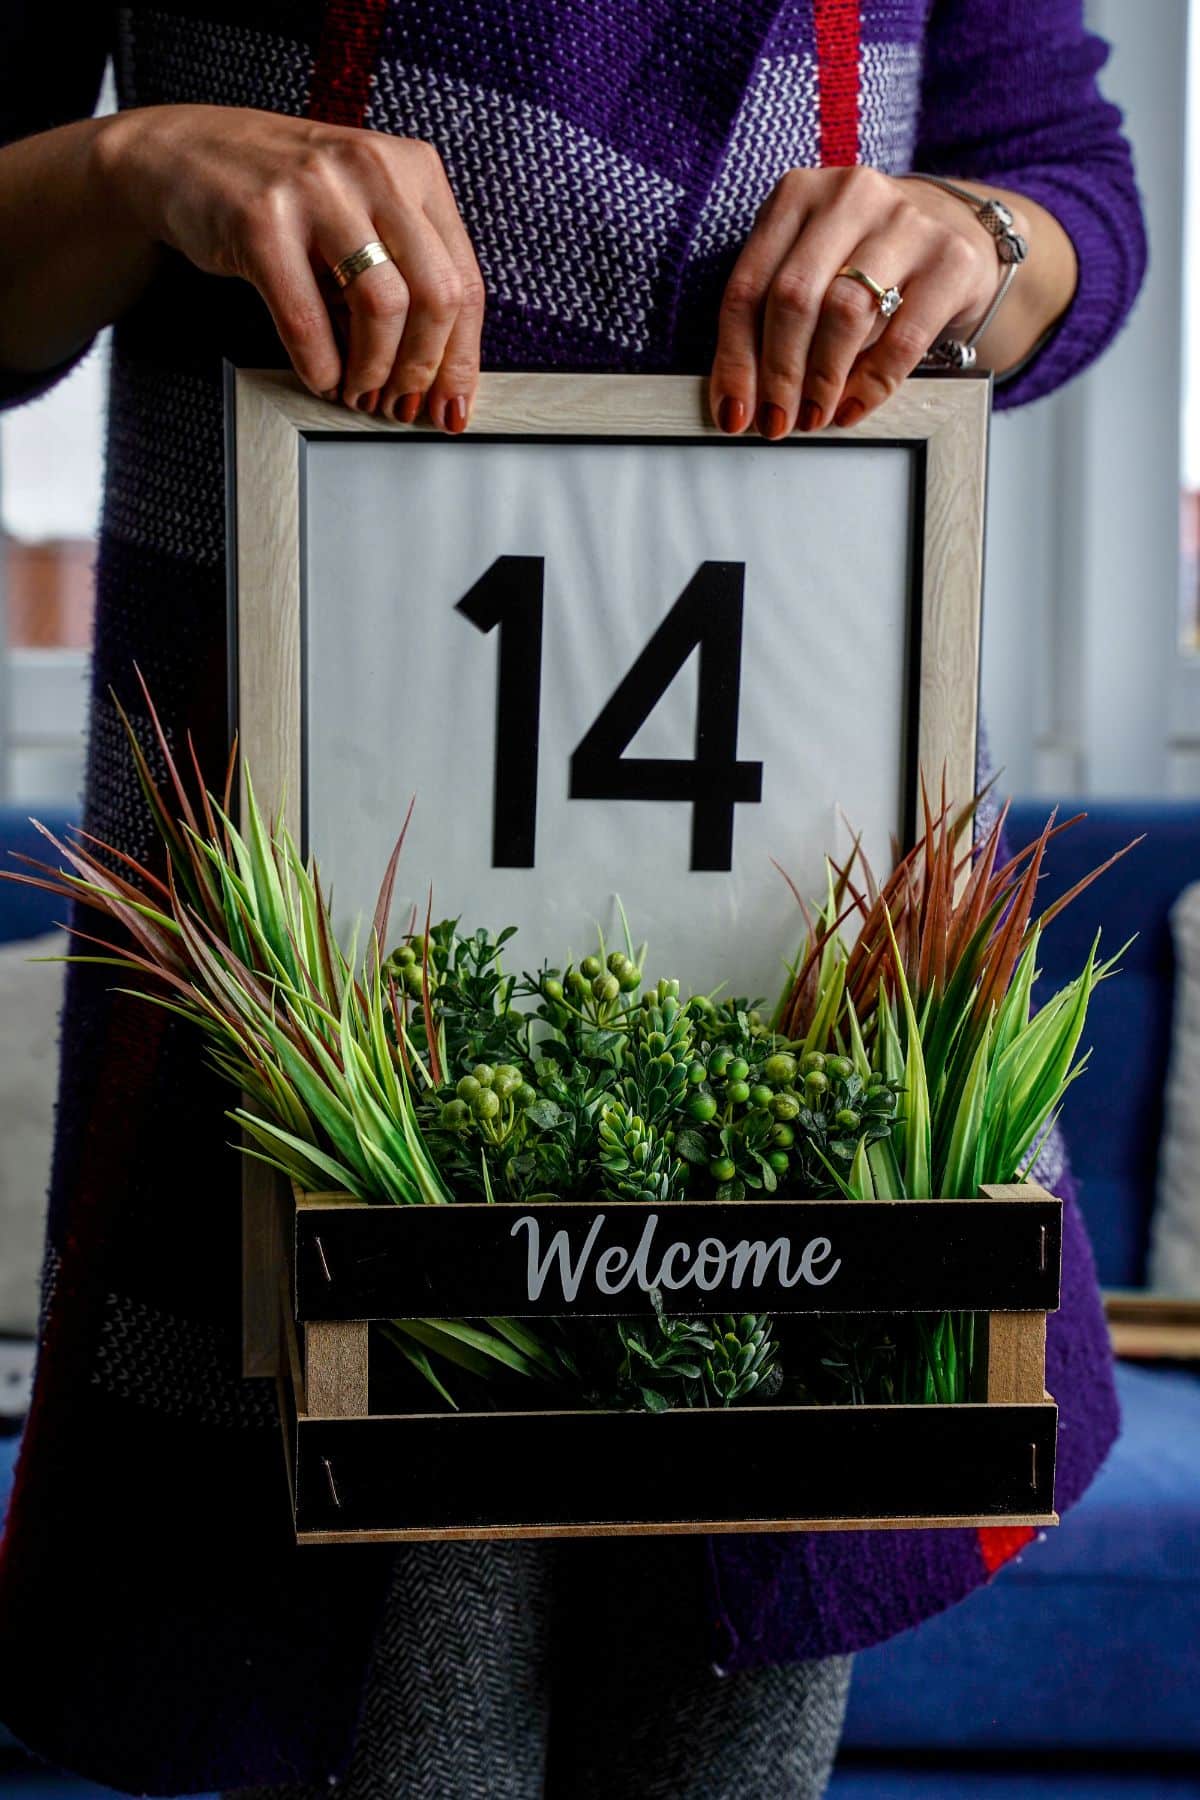 woman in purple holding framed house number sign